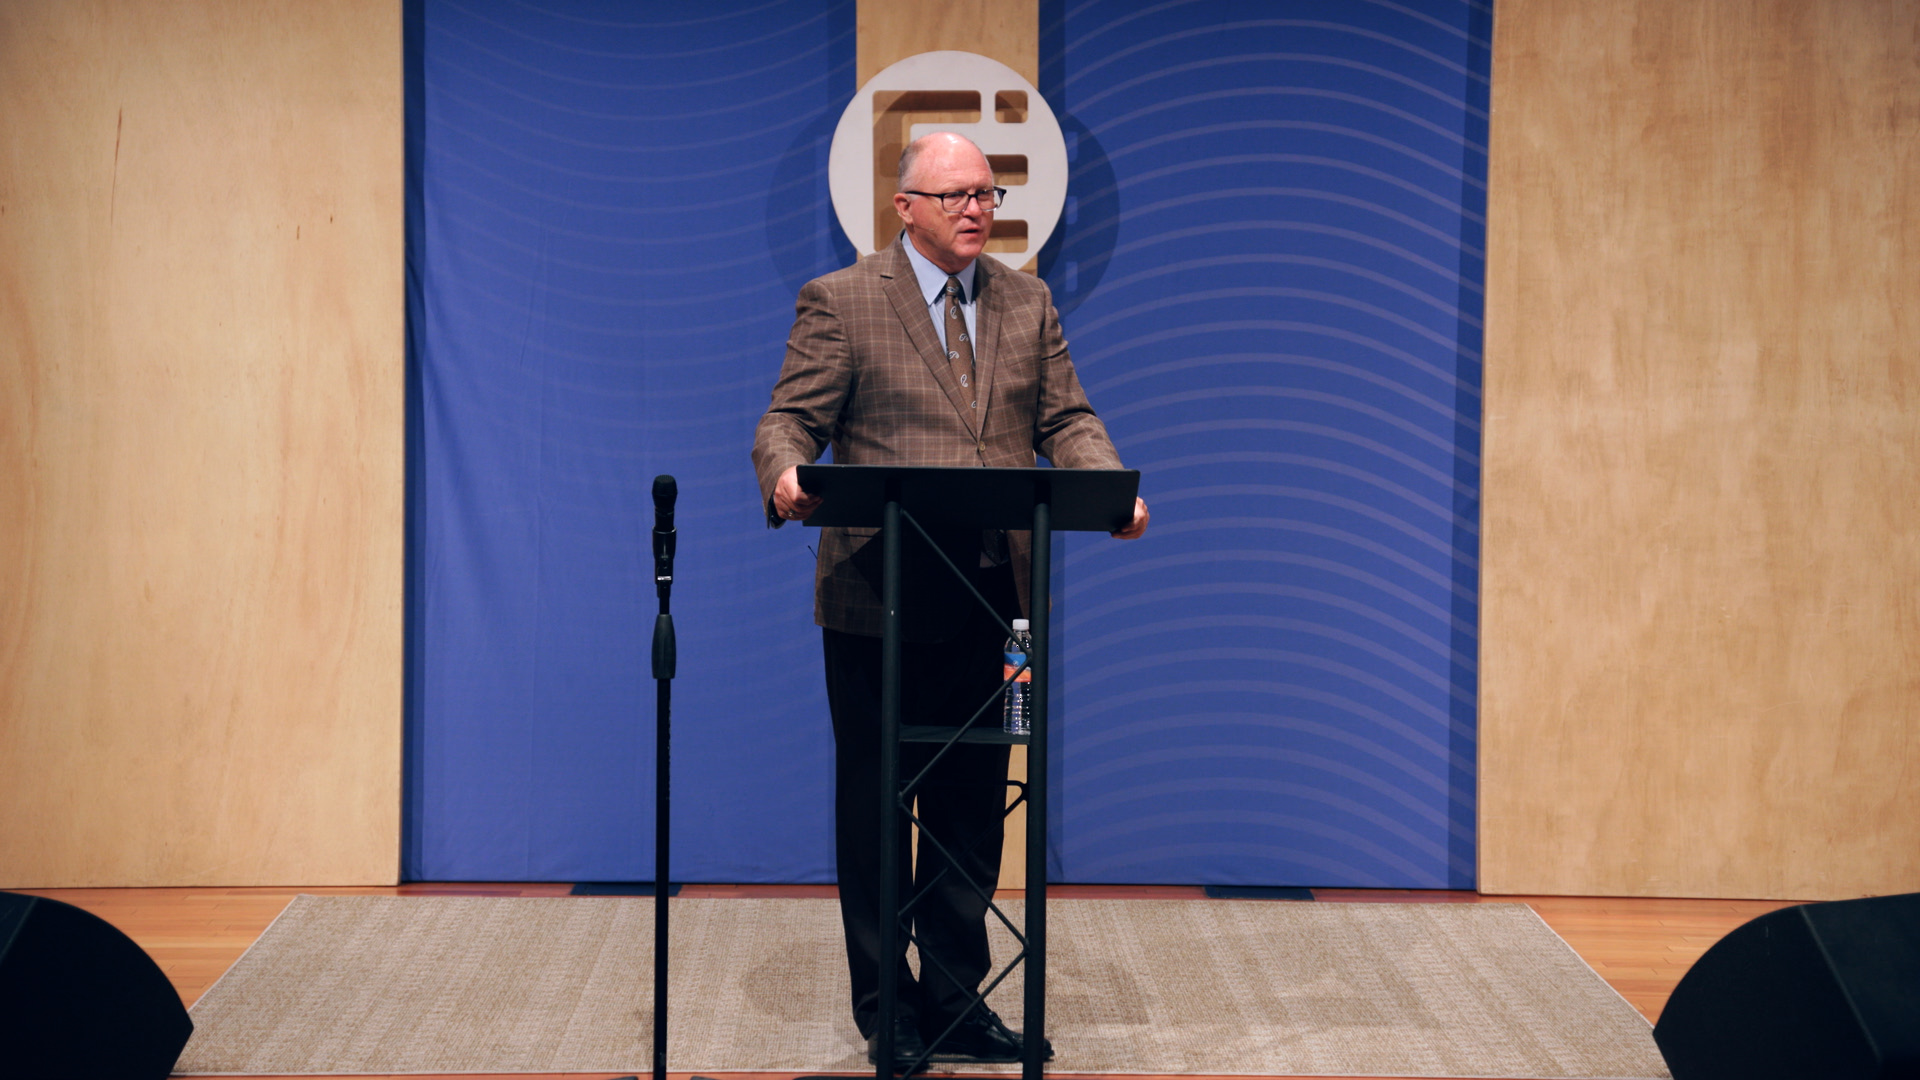 Pastor Paul Chappell: Becoming A Disciple